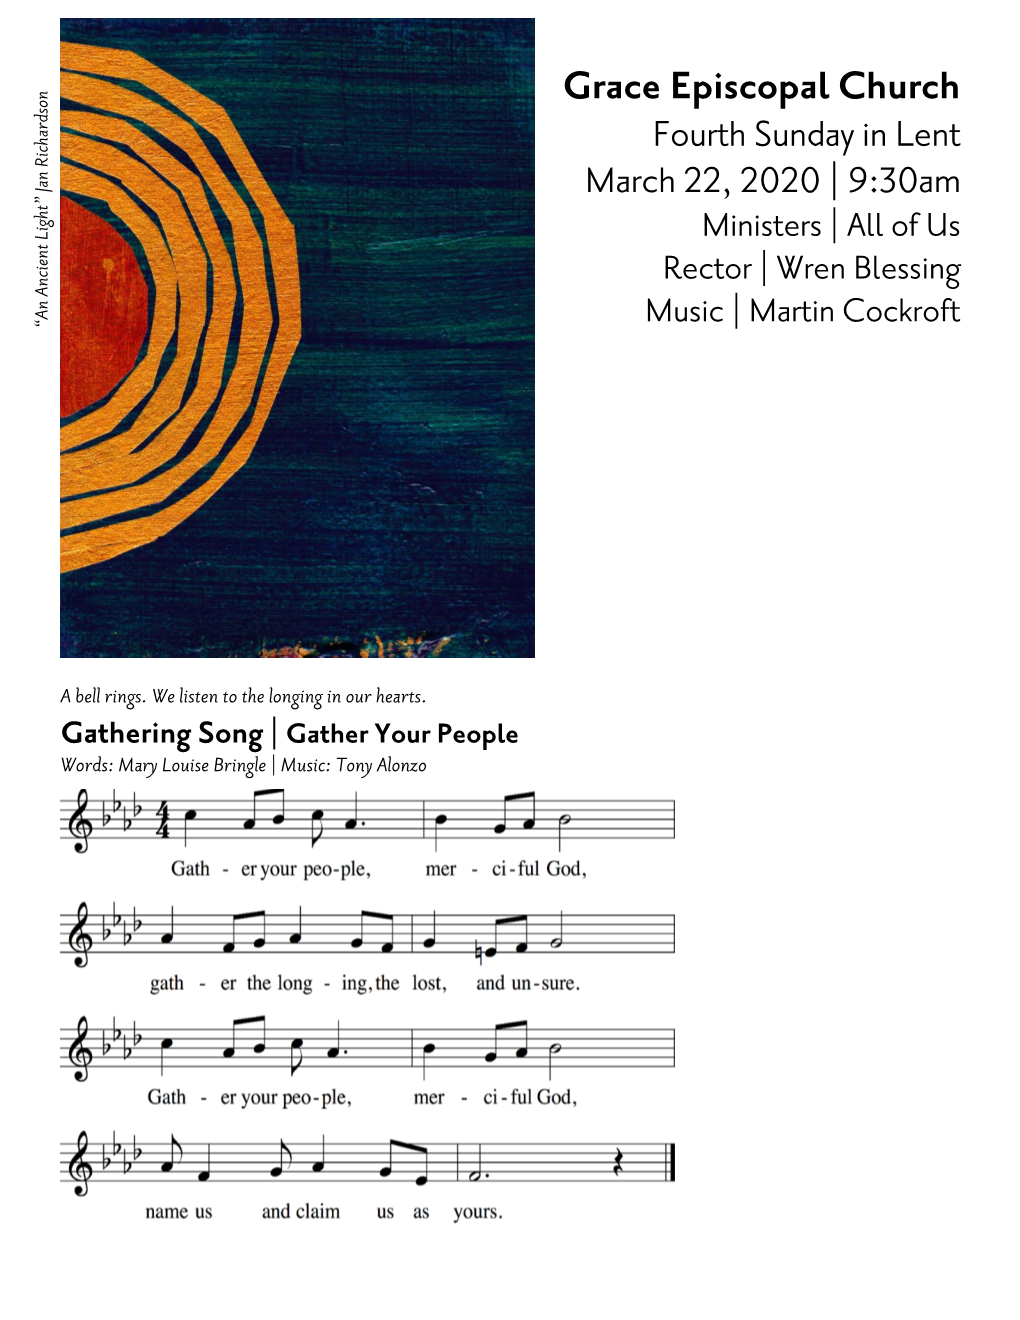 Fourth Sunday in Lent March 22, 2020 | 9:30Am Ministers | All of Us Rector | Wren Blessing